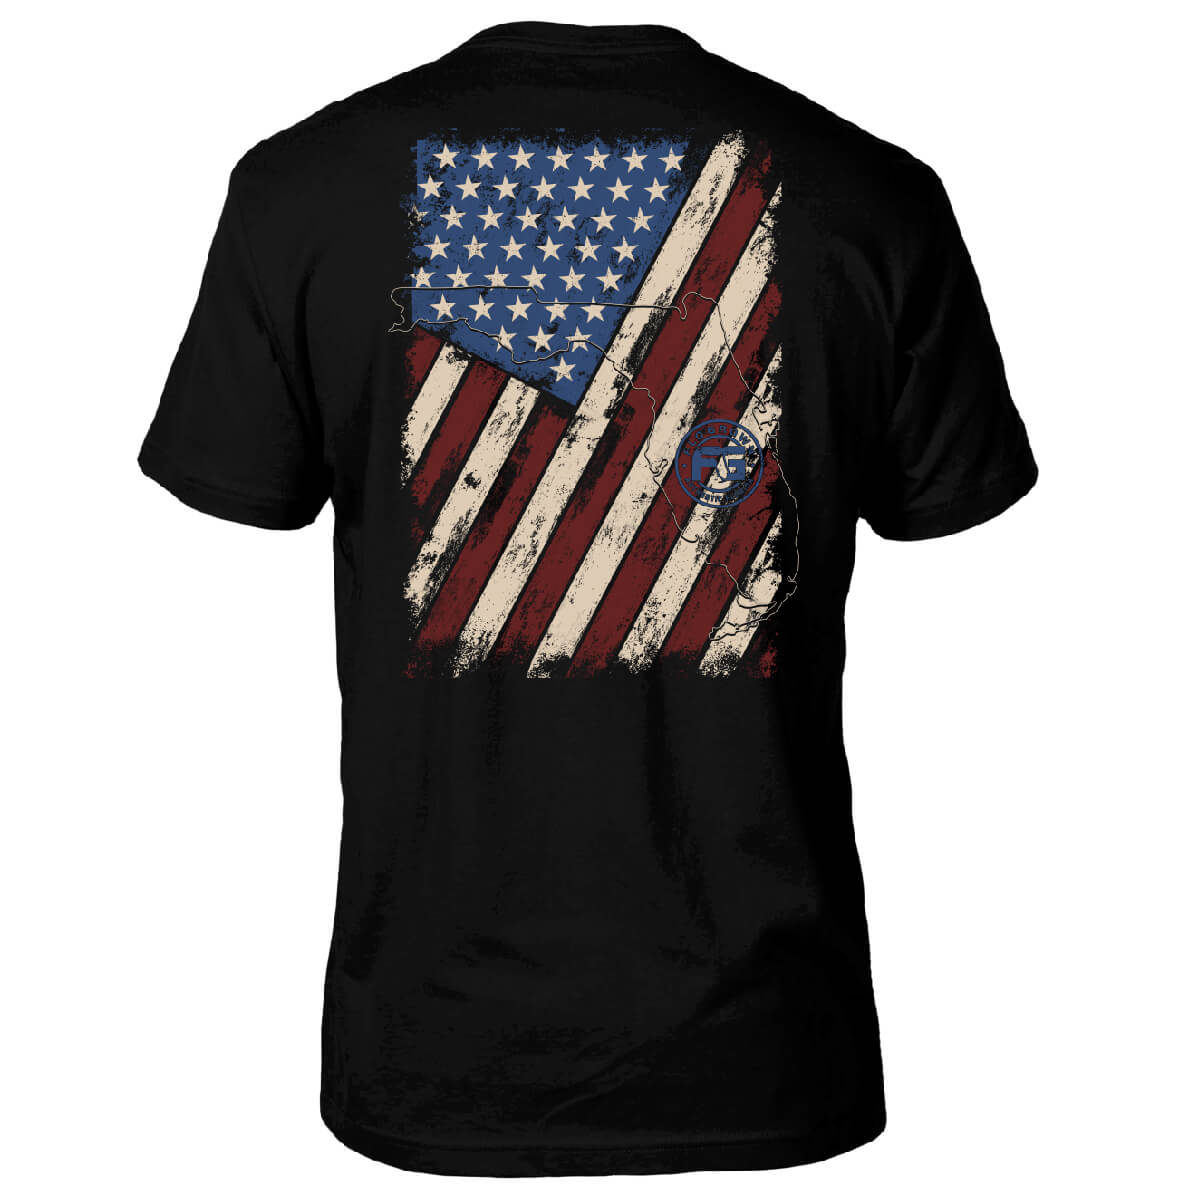 The Great Nation Tee